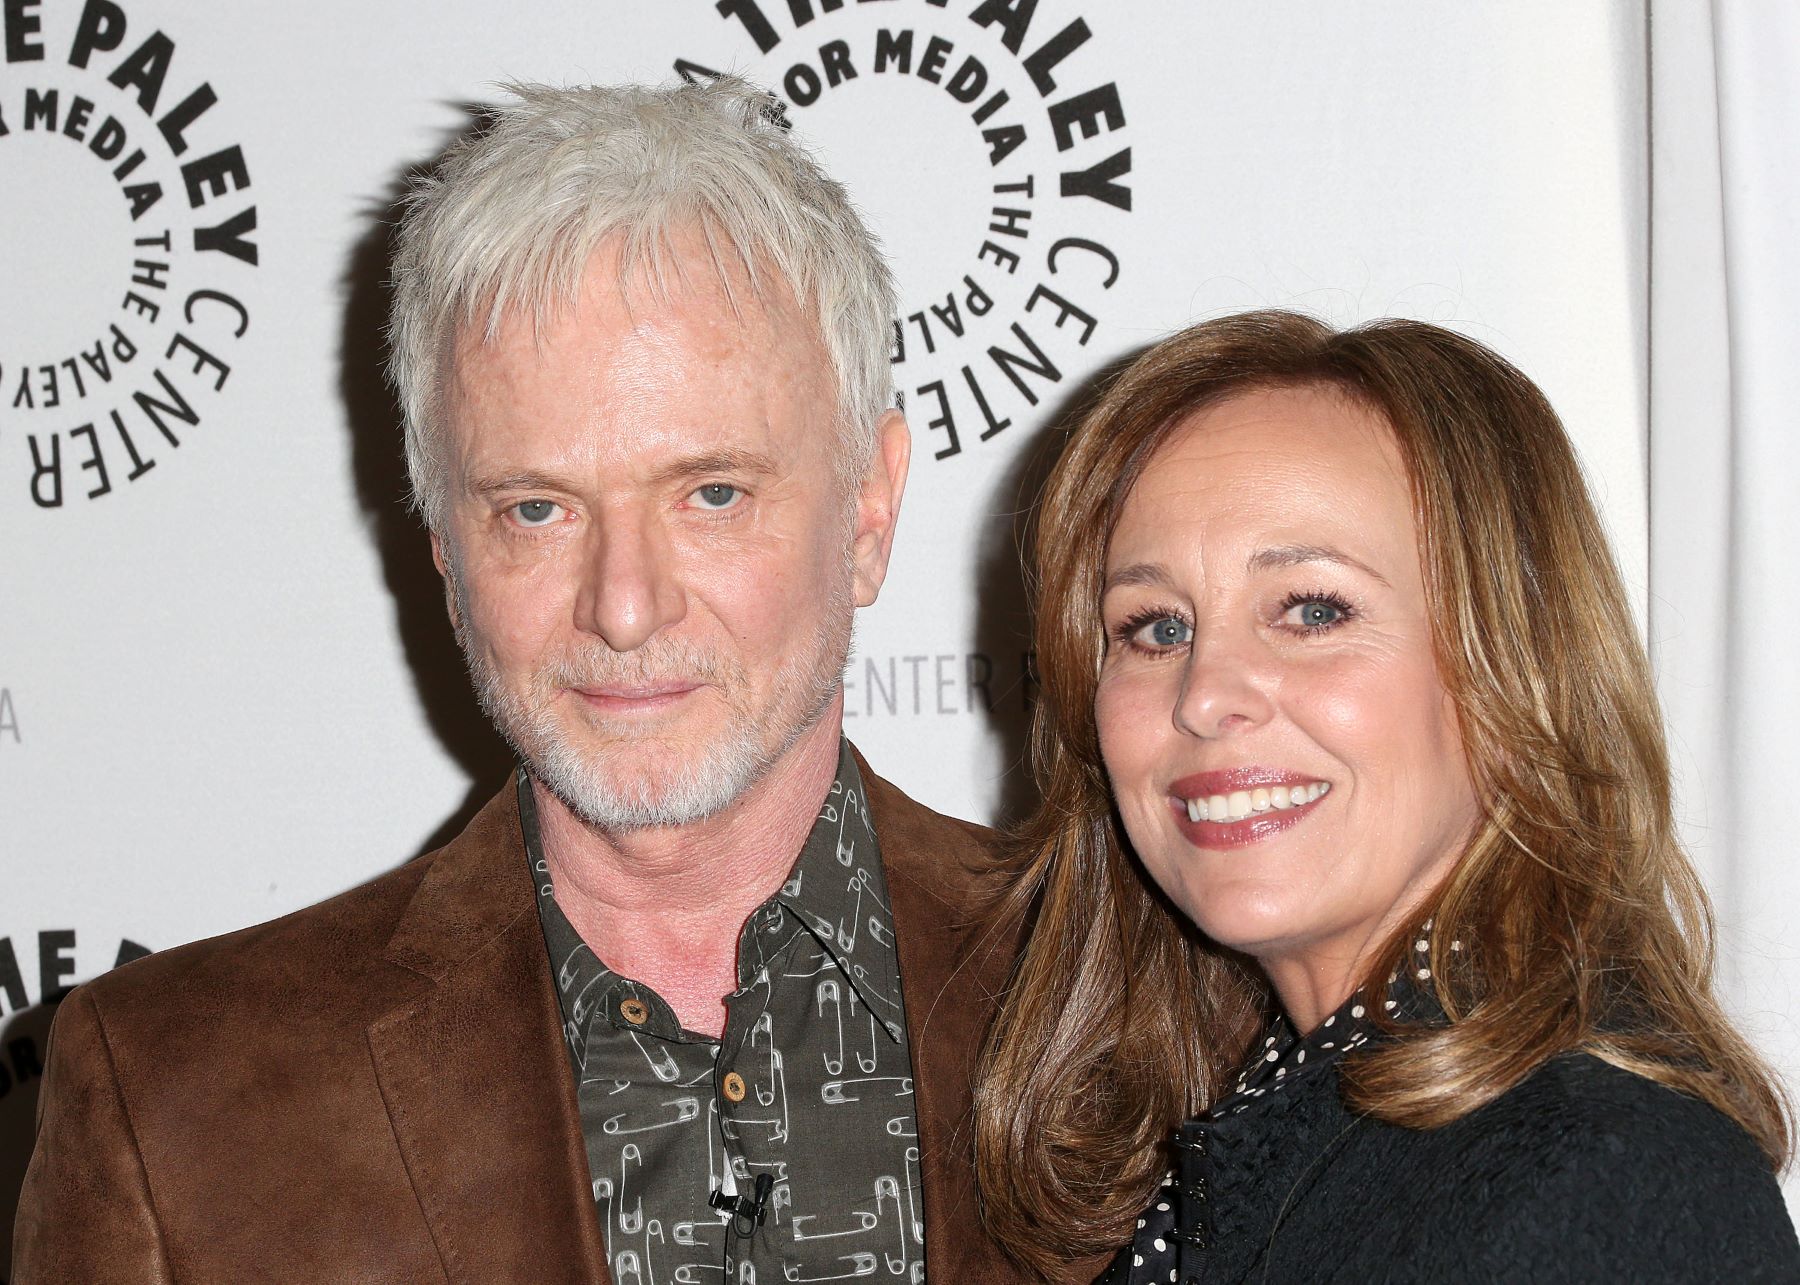 Actors Anthony Geary and Genie Francis of 'General Hospital' at The Paley Center for Media in Beverly Hills